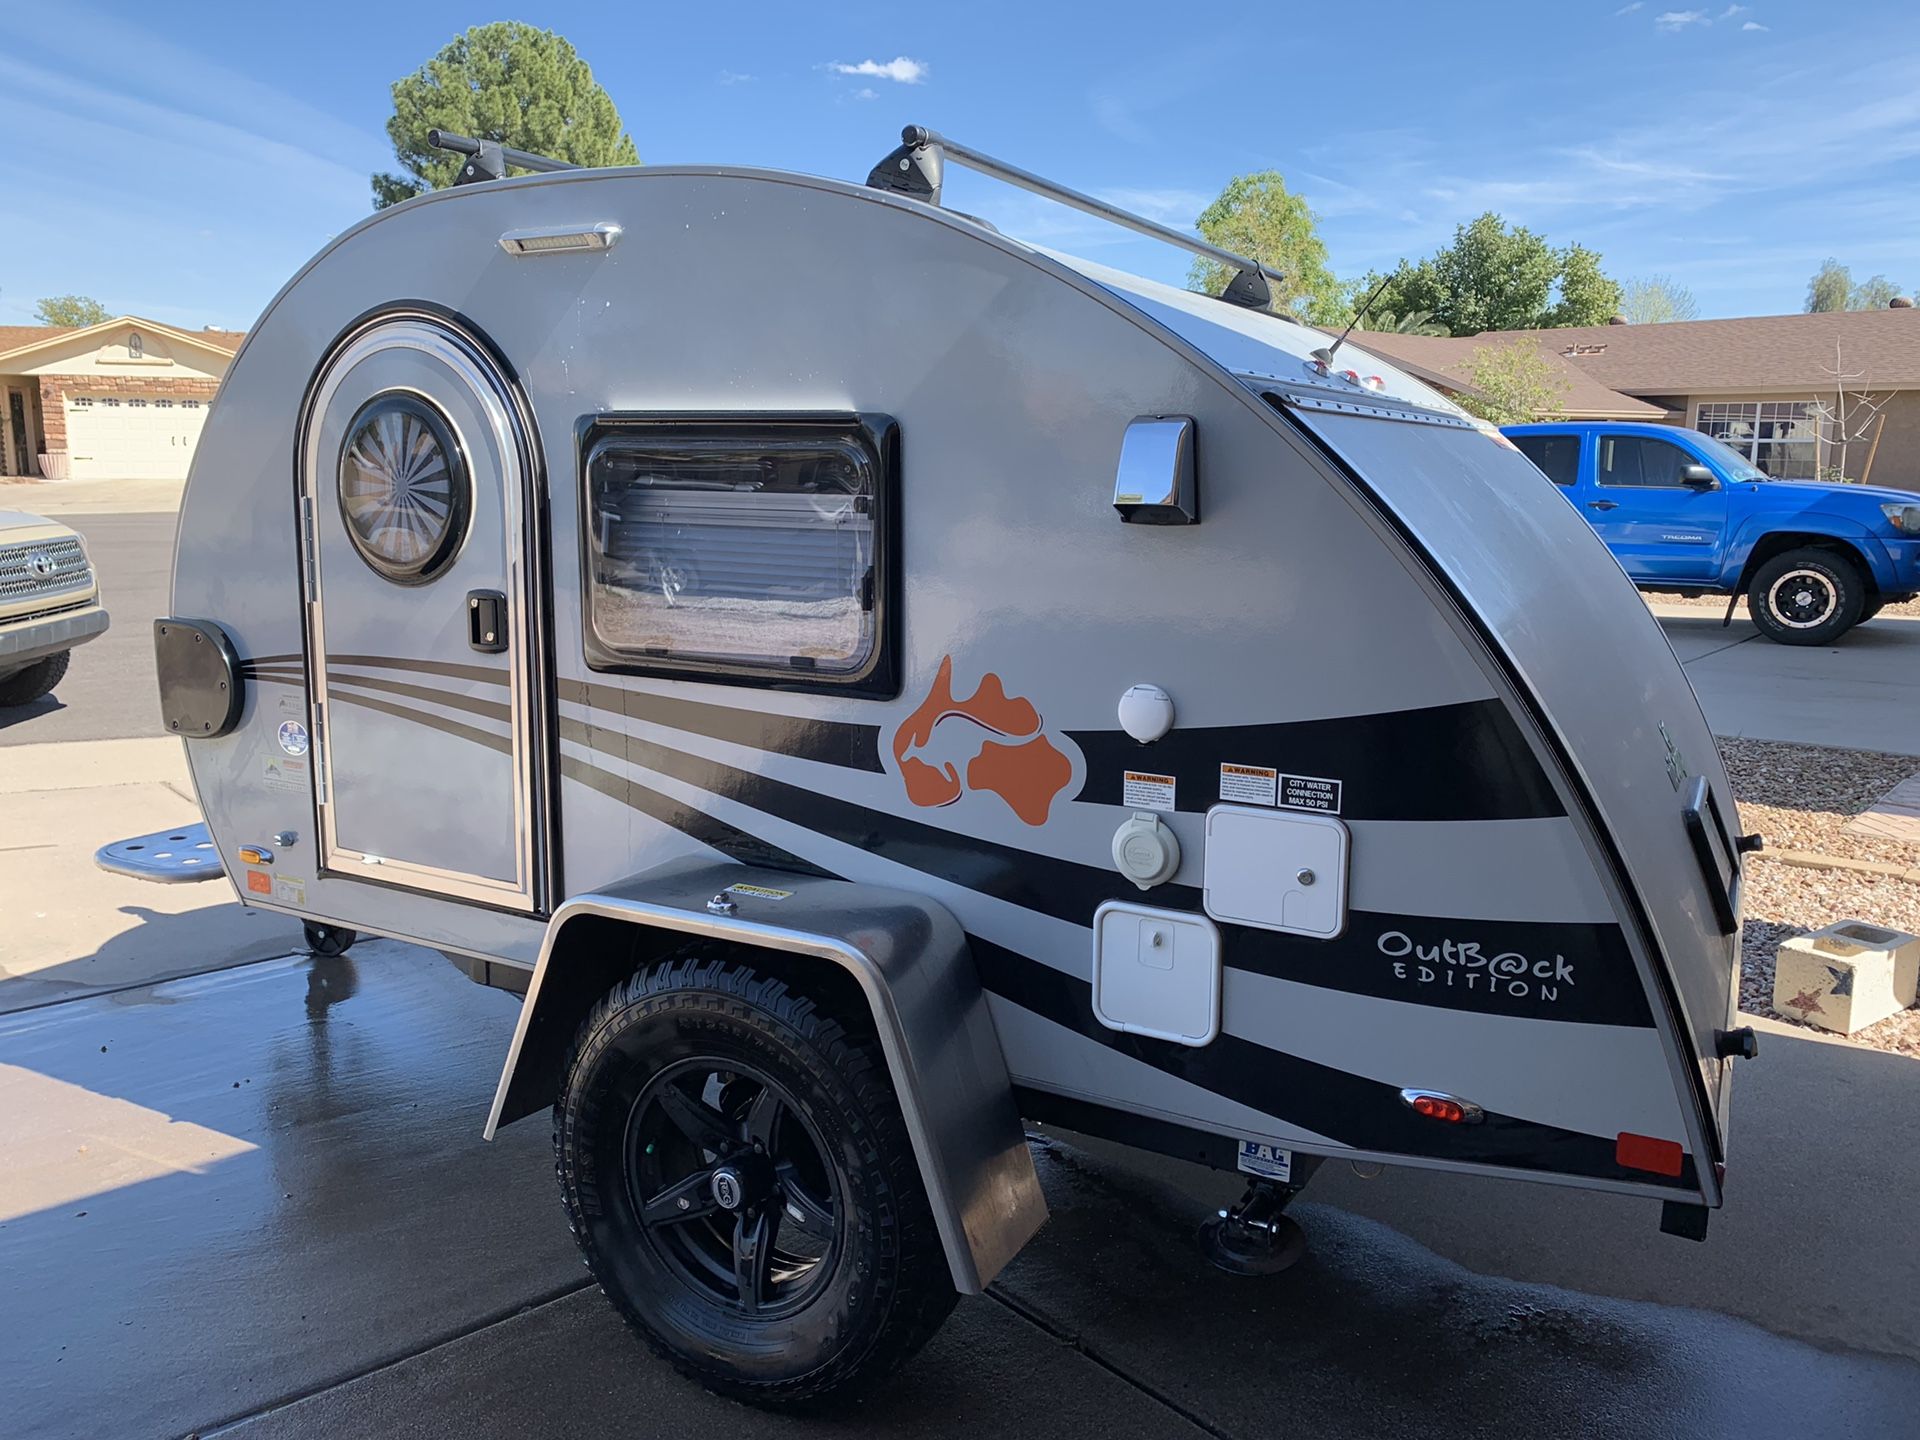 2018 Nucamp Tag XL Outback Teardrop Camper - priced to sell!